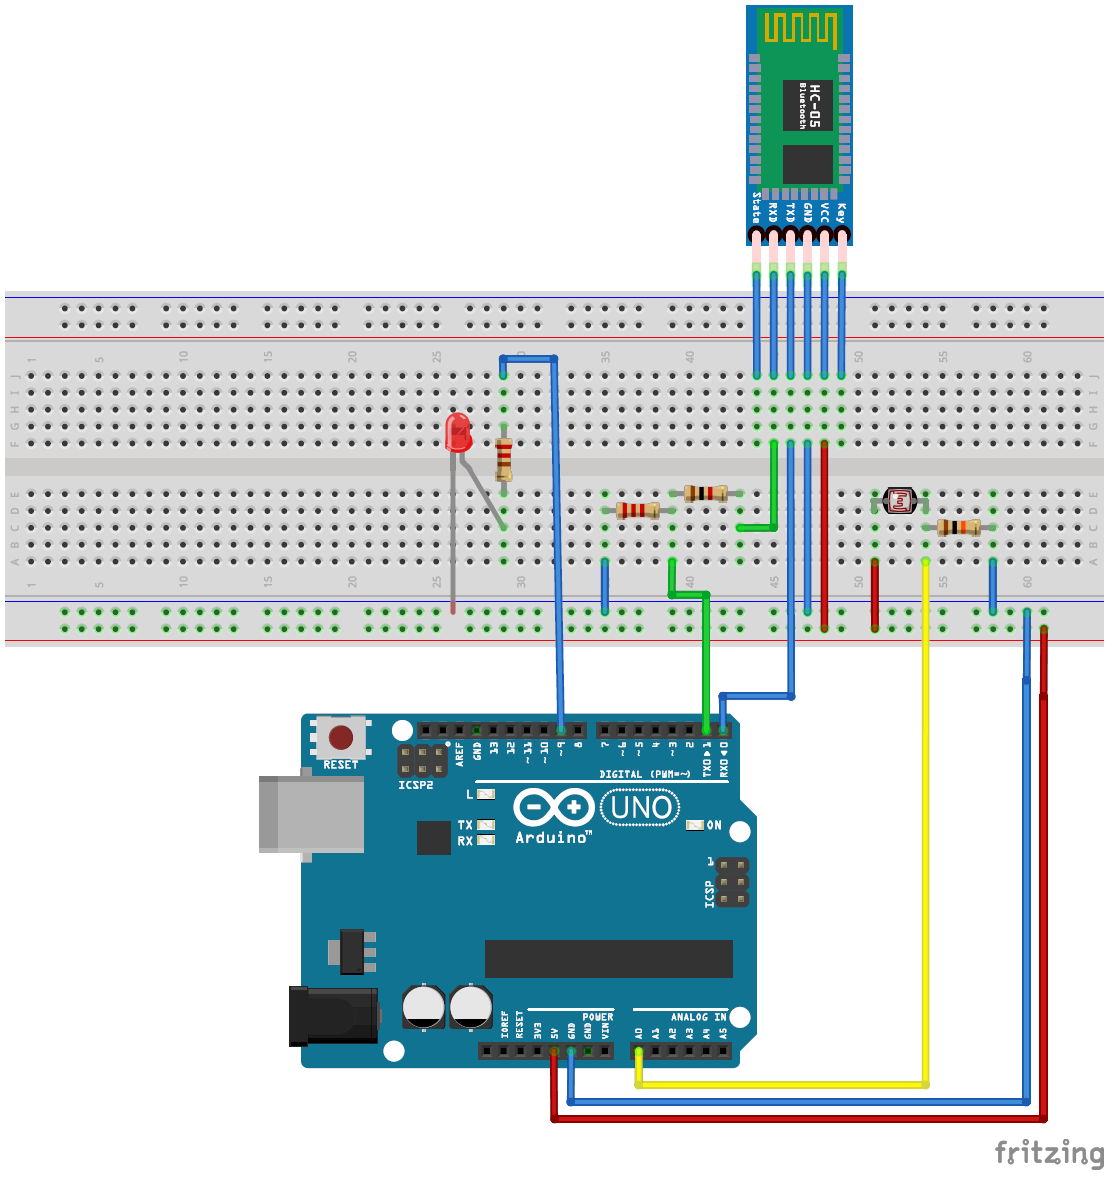 Circuit of Arduino breadboard assembly - made with Fritzing